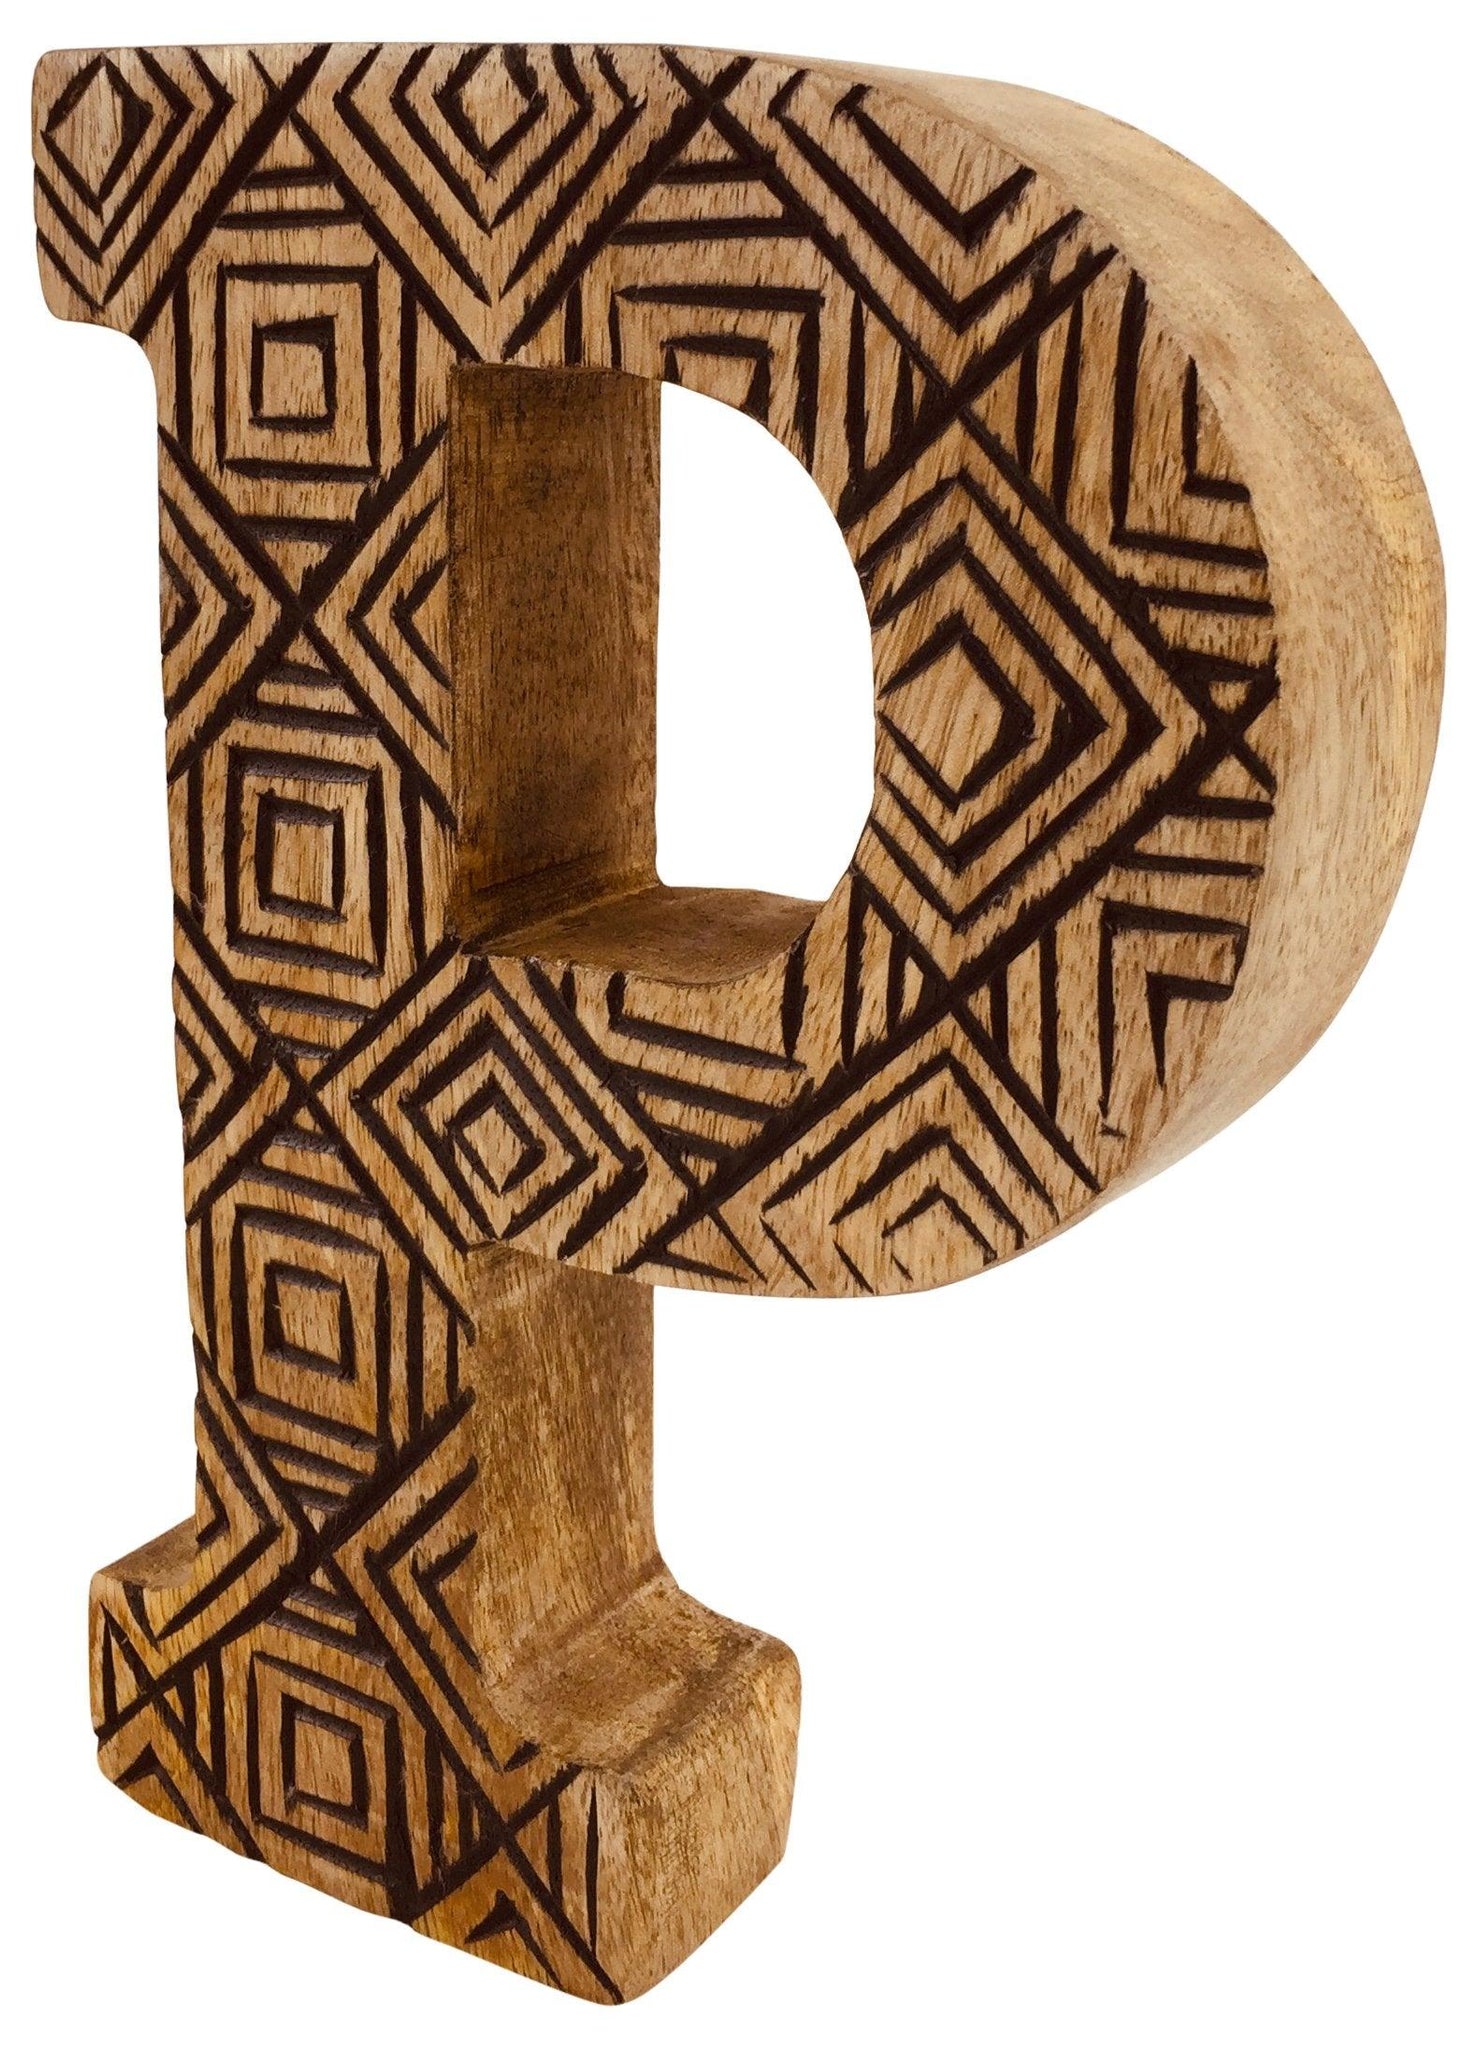 Hand Carved Wooden Geometric Letter P - £12.99 - Single Letters 